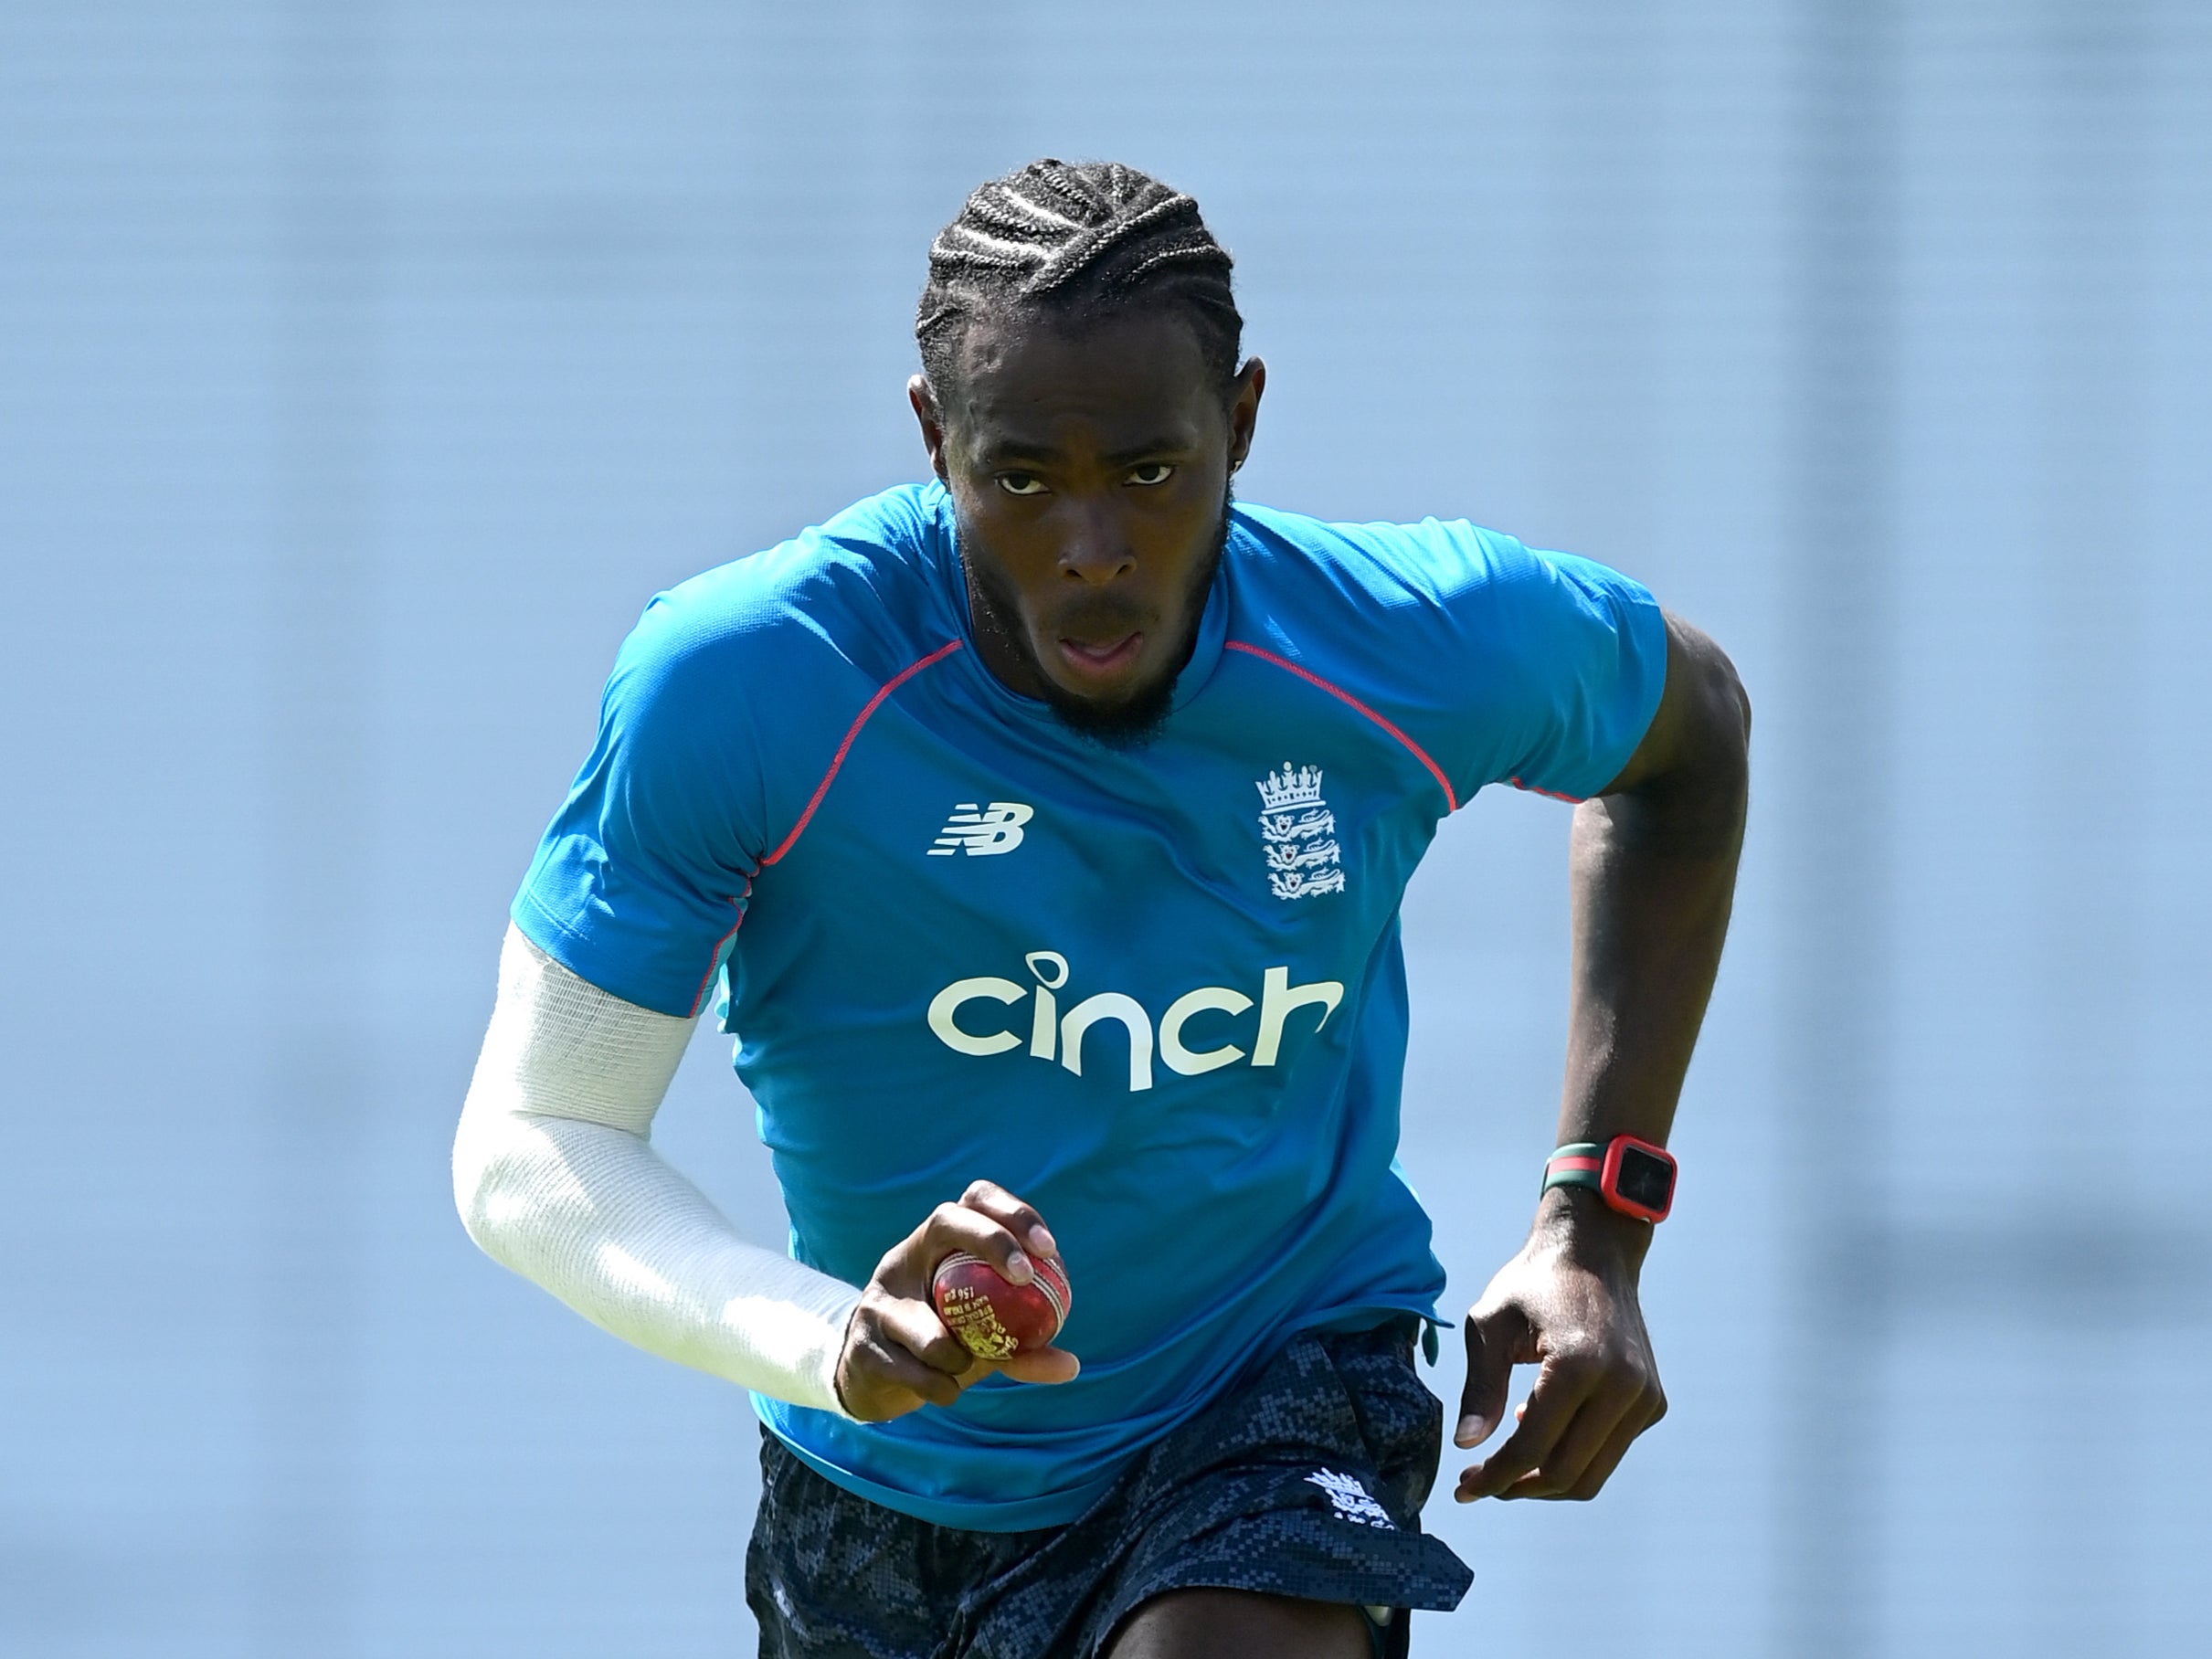 The fast bowler has not played for England since March 2021 due to injury